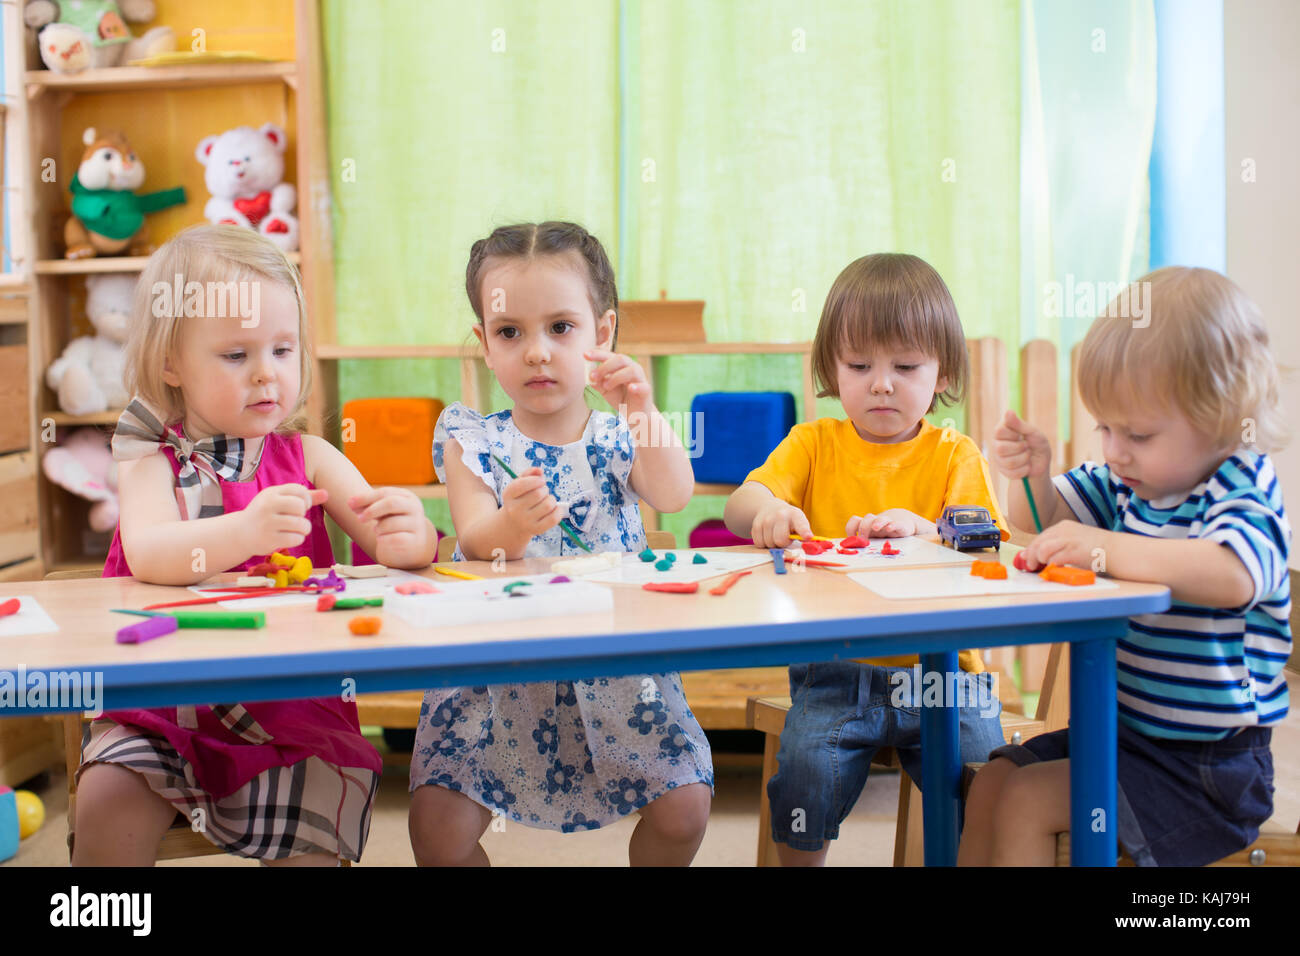 Kids group making arts and crafts in kindergarten or daycare center Stock Photo